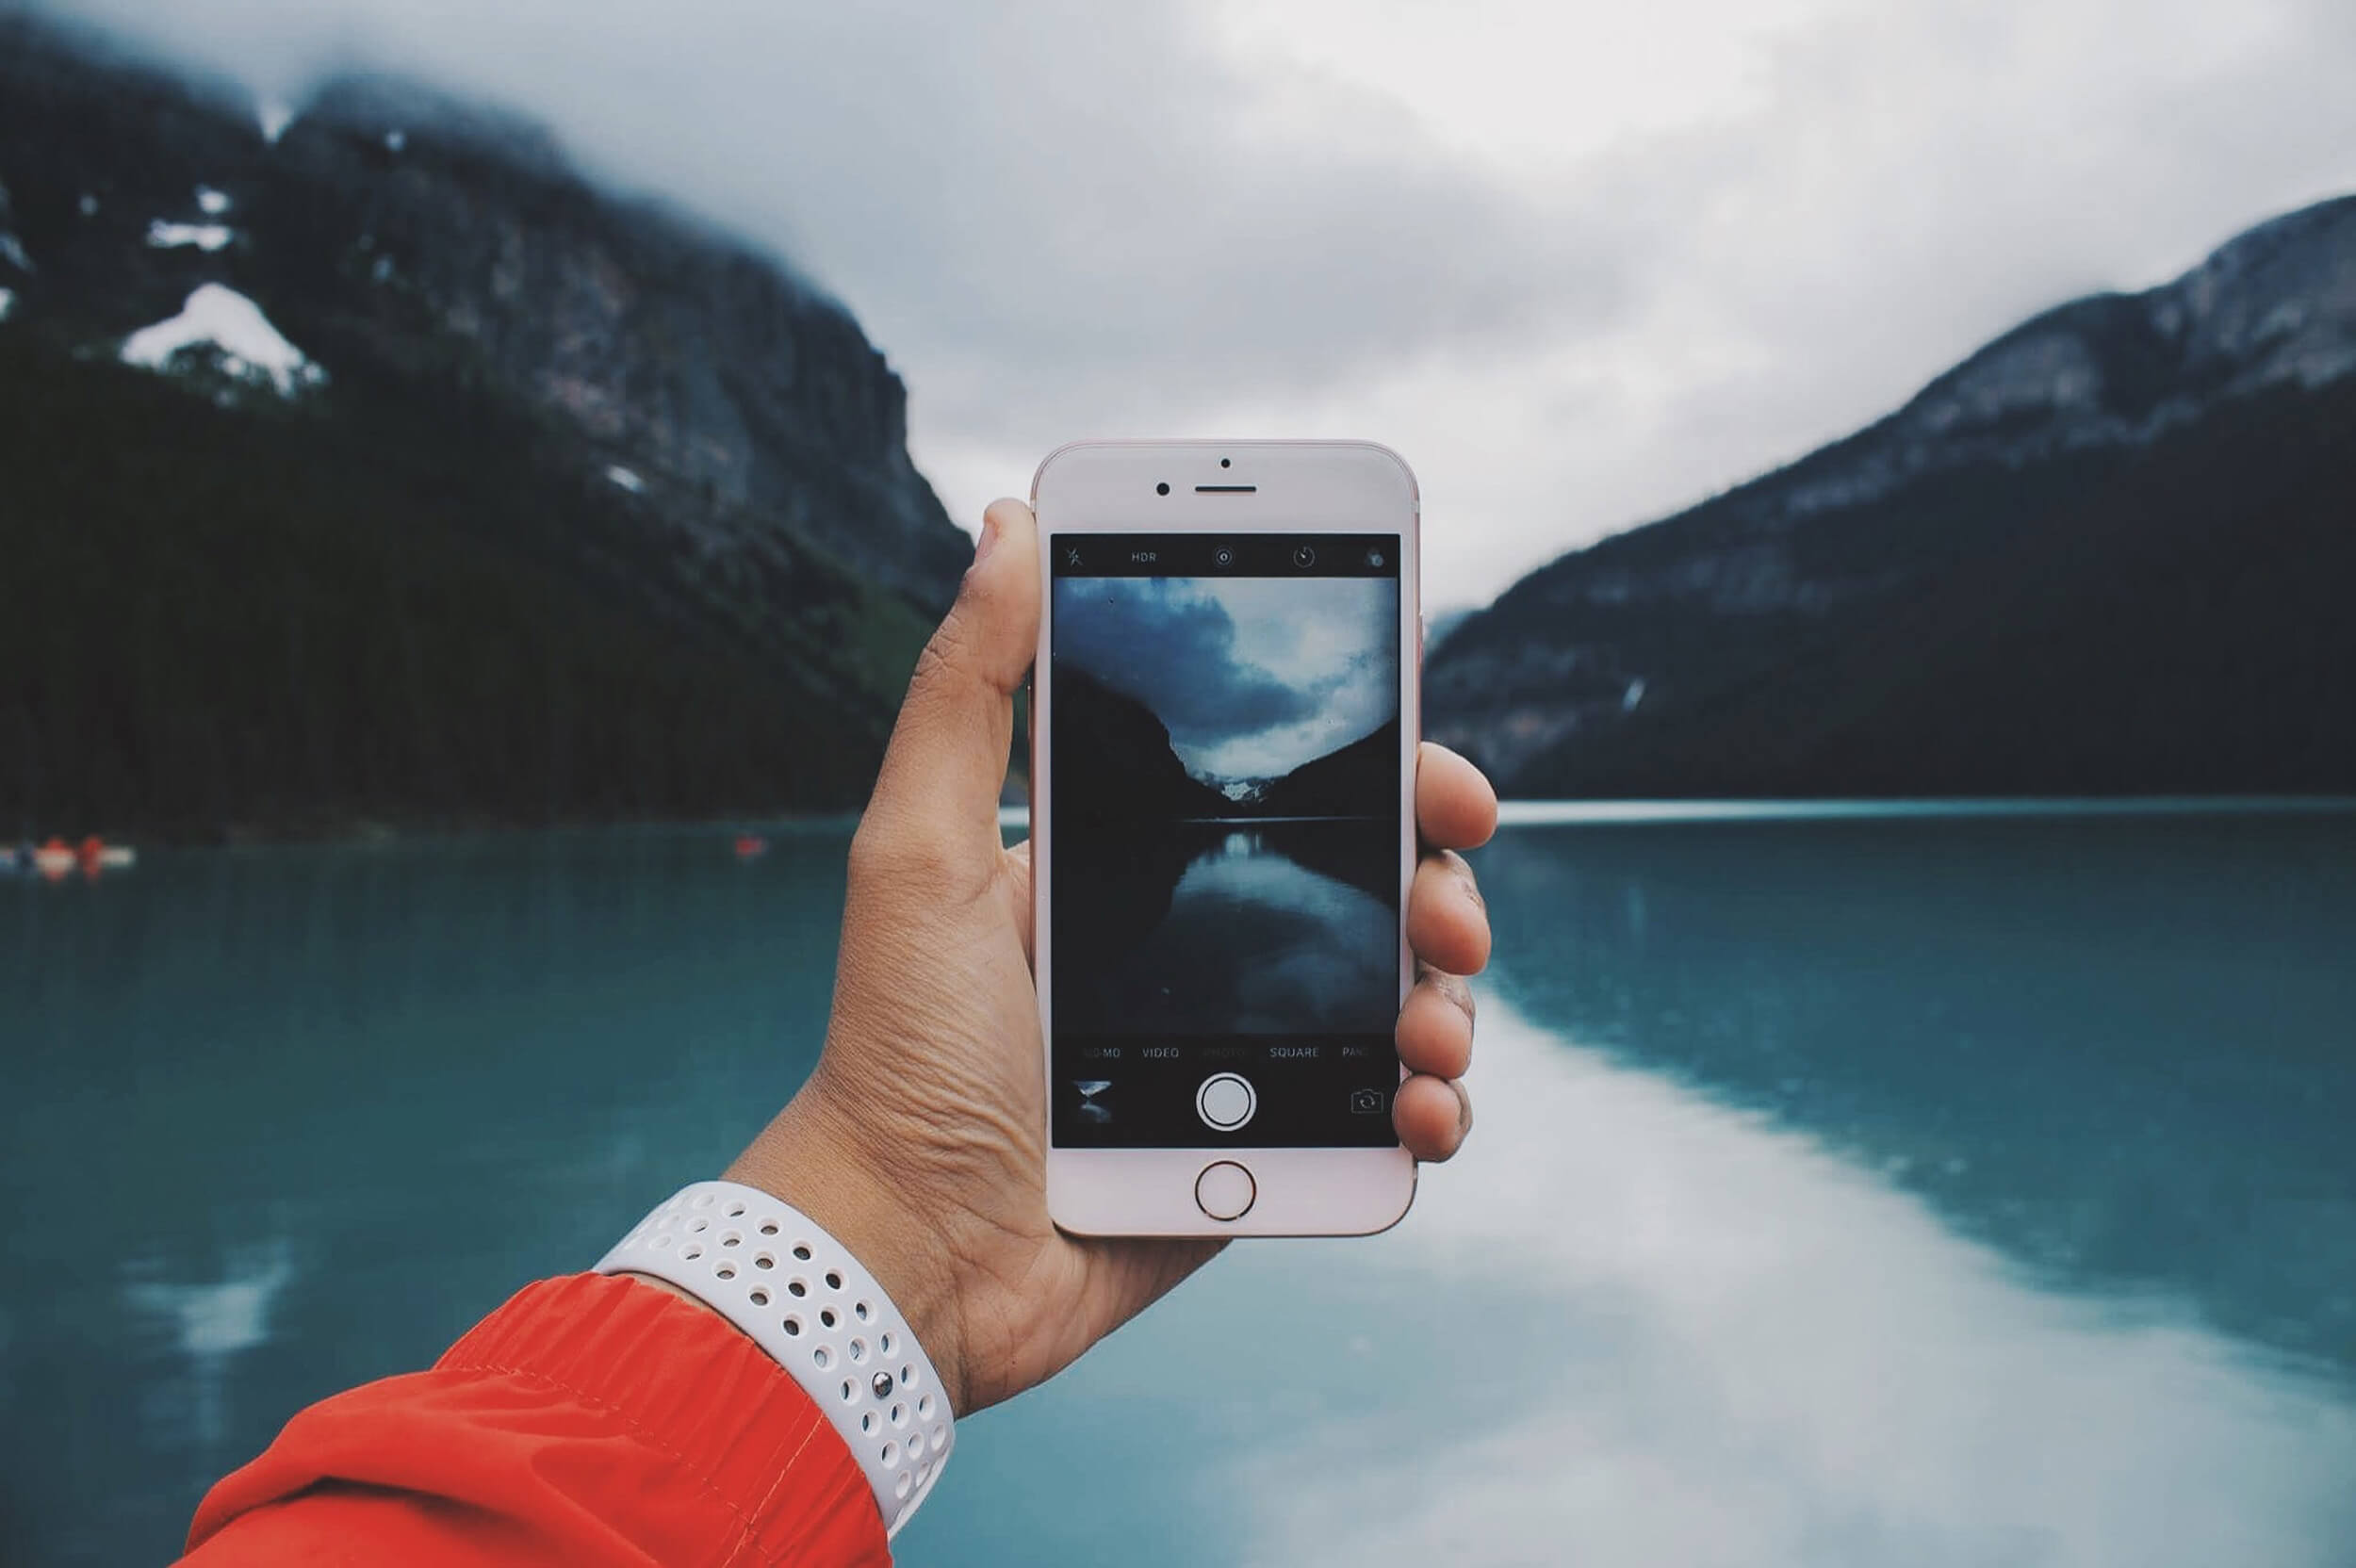 This new smartphone can take pictures of lakes